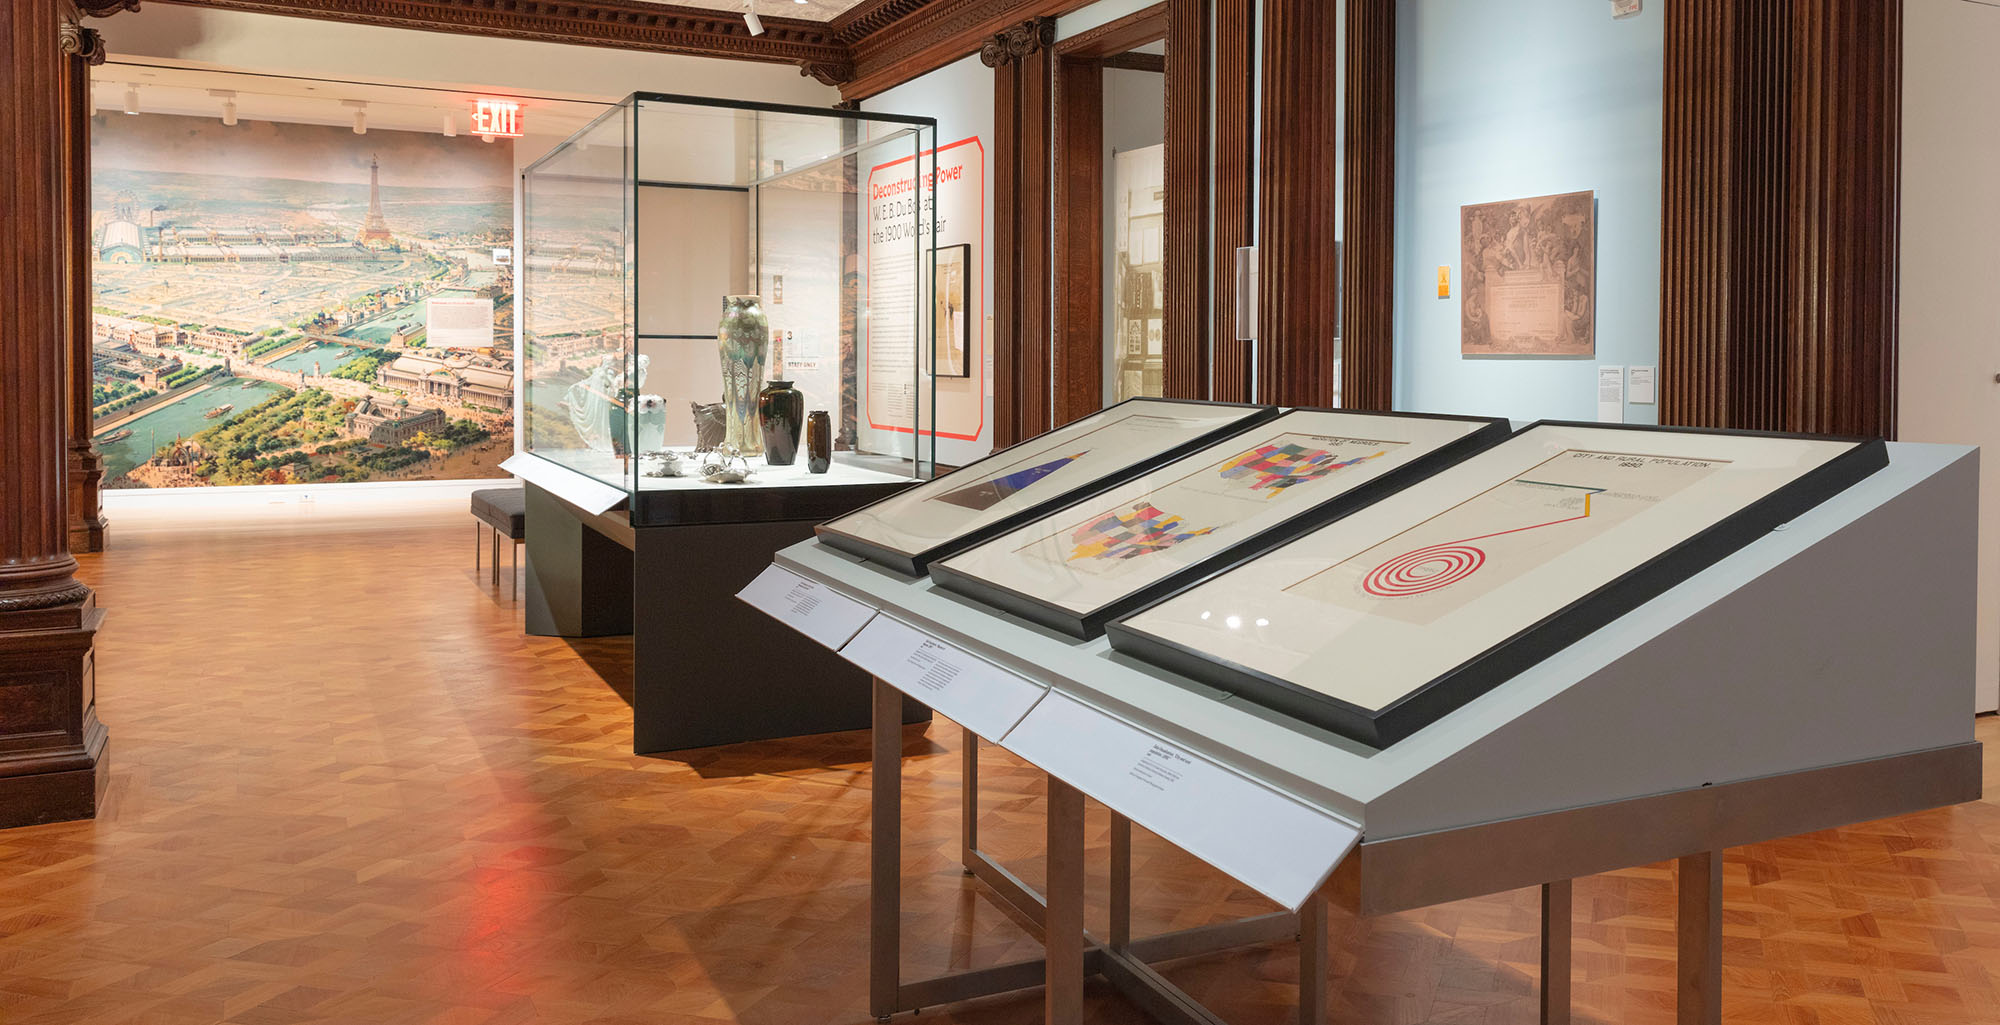 View of exhibition space with three framed artworks on a slanted table in foreground and colorful vases in a glass vitrine in background.